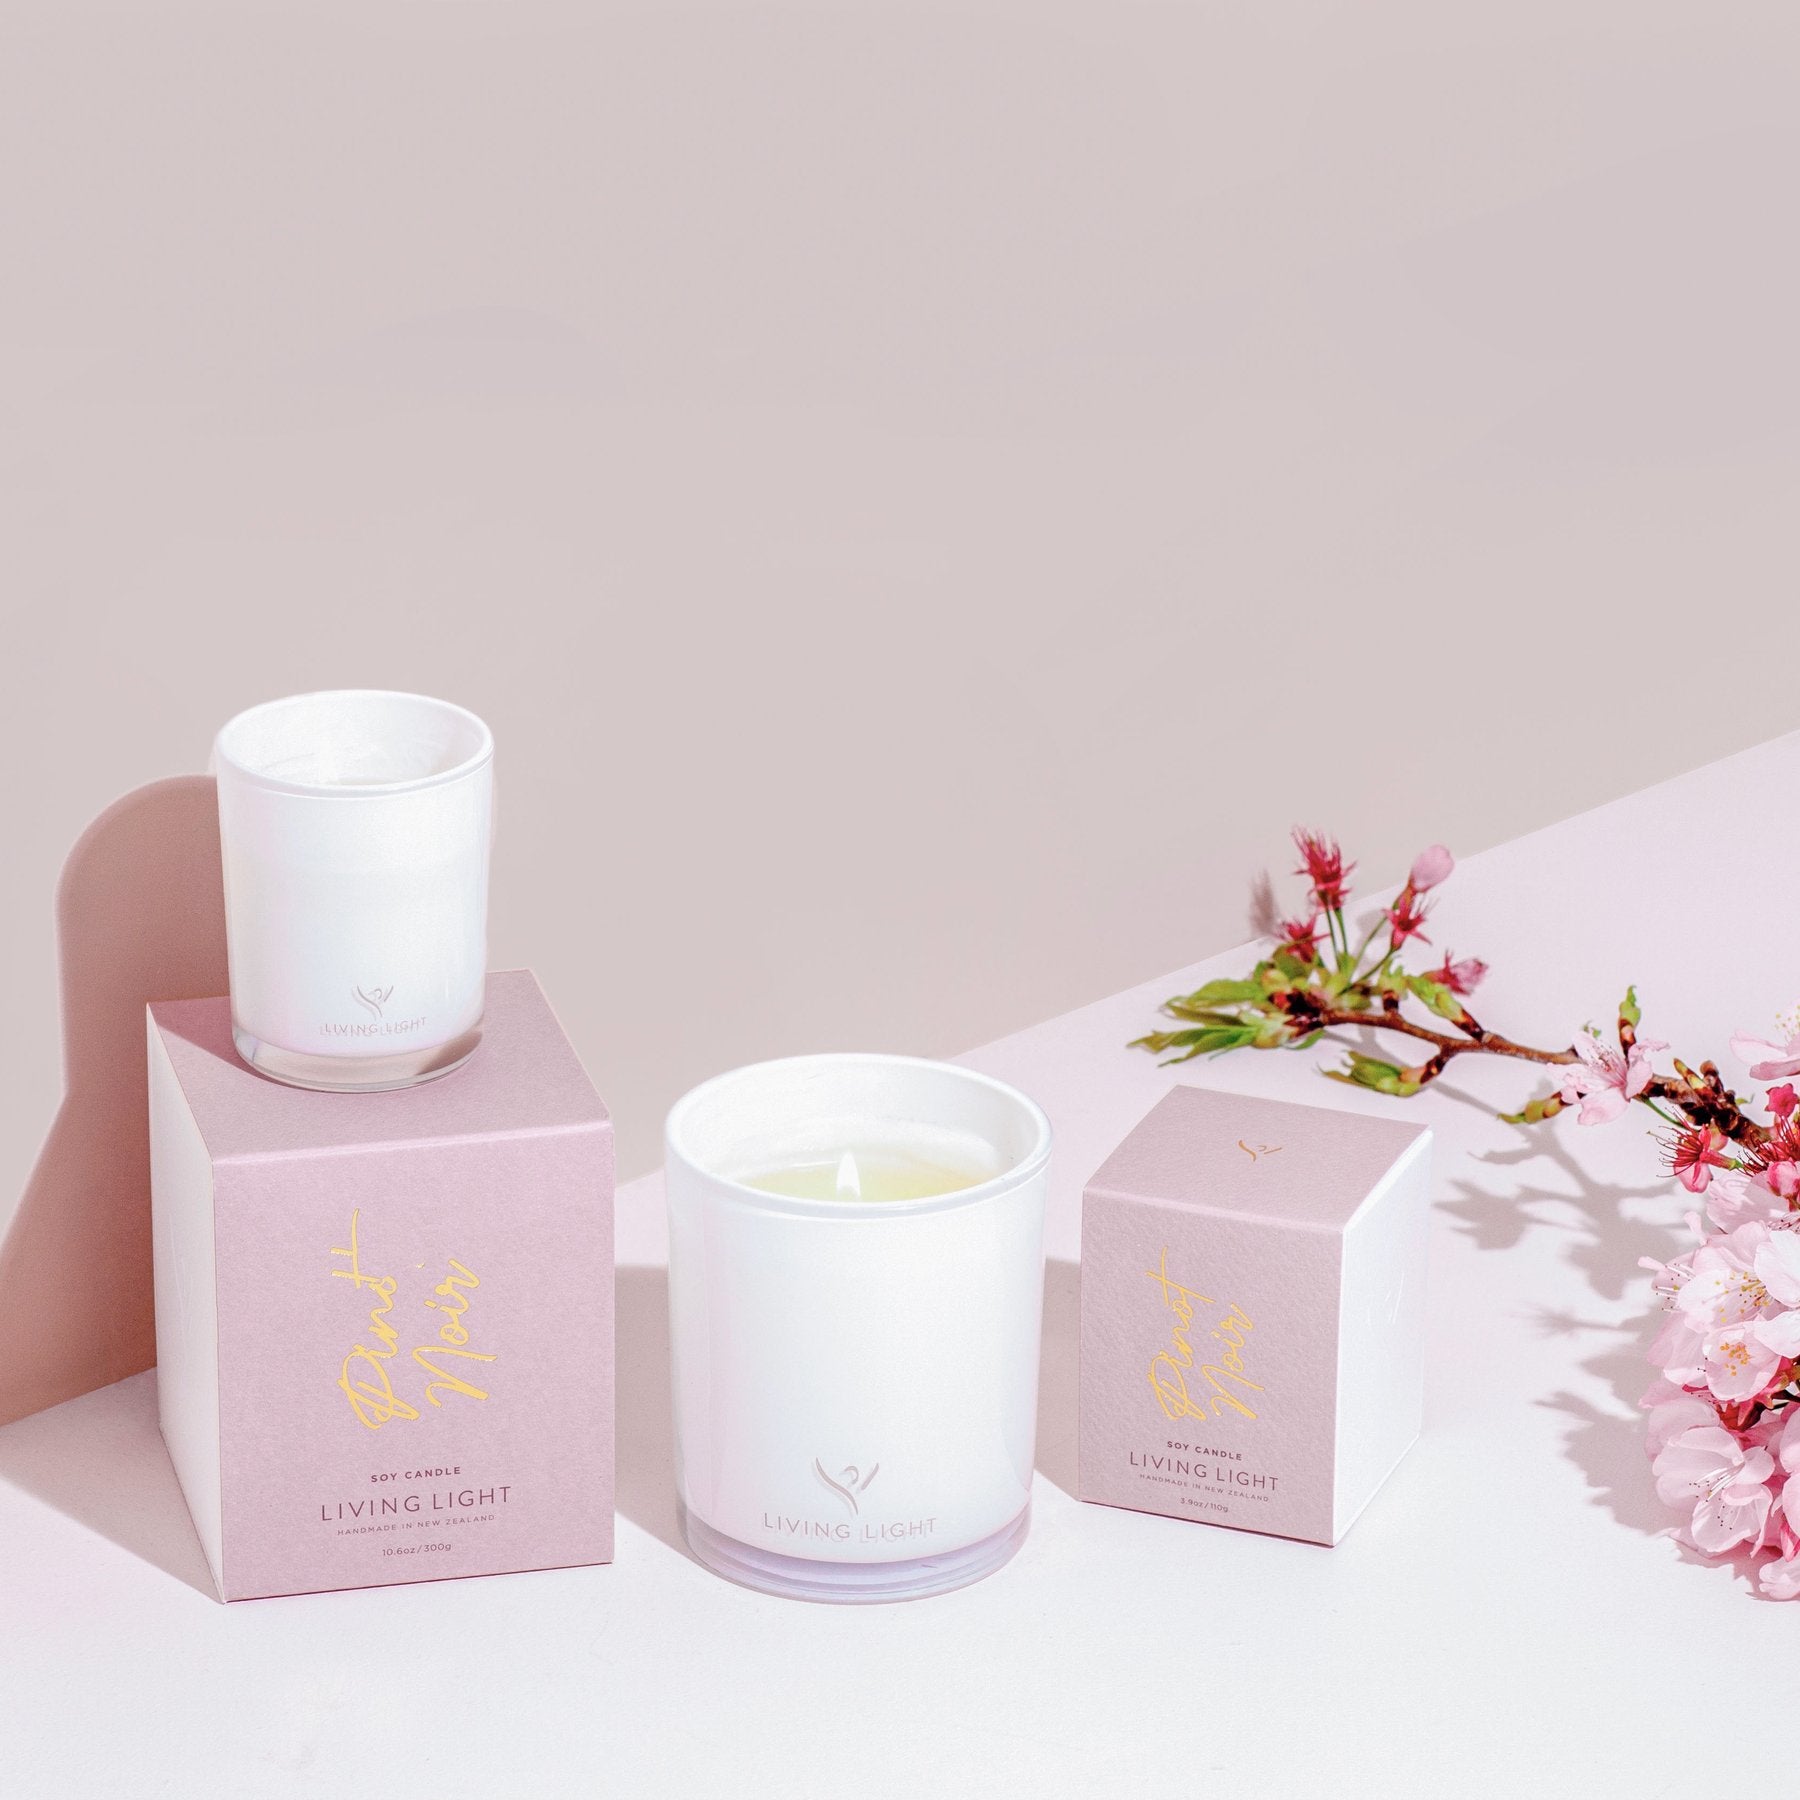 Soy Candle | Mini - Pinot Noir Living light Candles